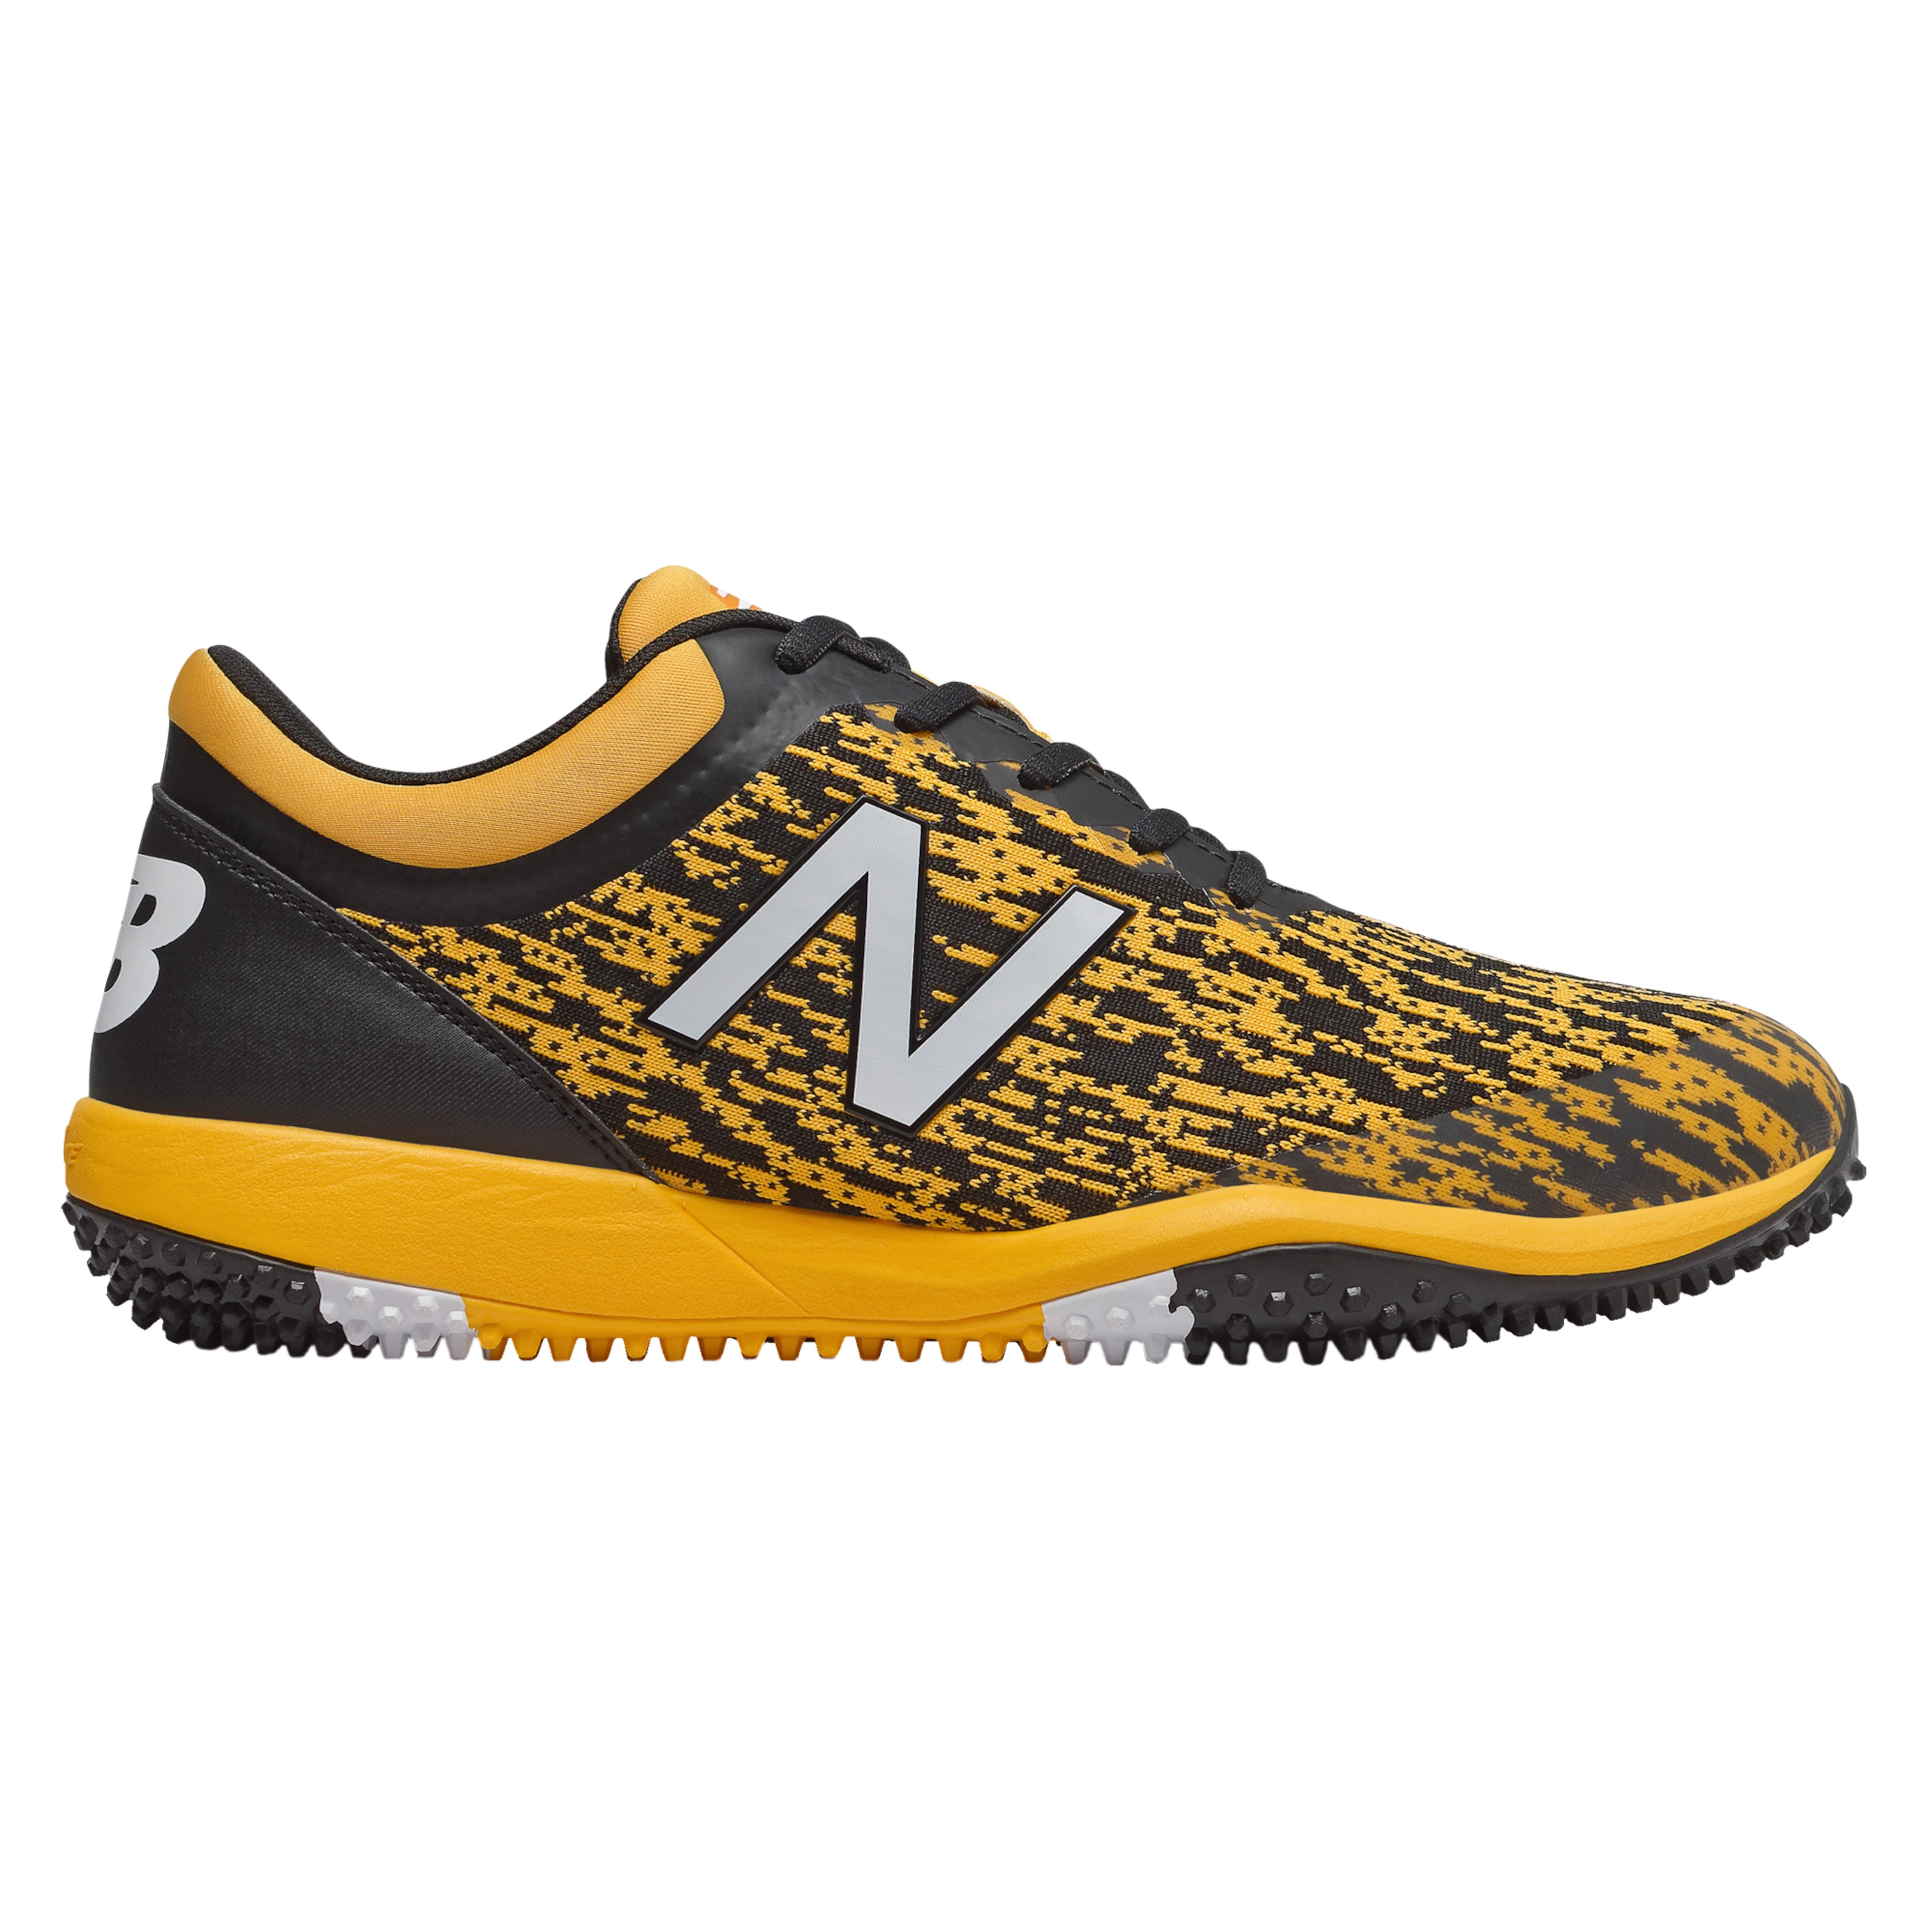 New Balance Synthetic 4040v5 Turf in Black/Yellow (Black) for Men - Lyst